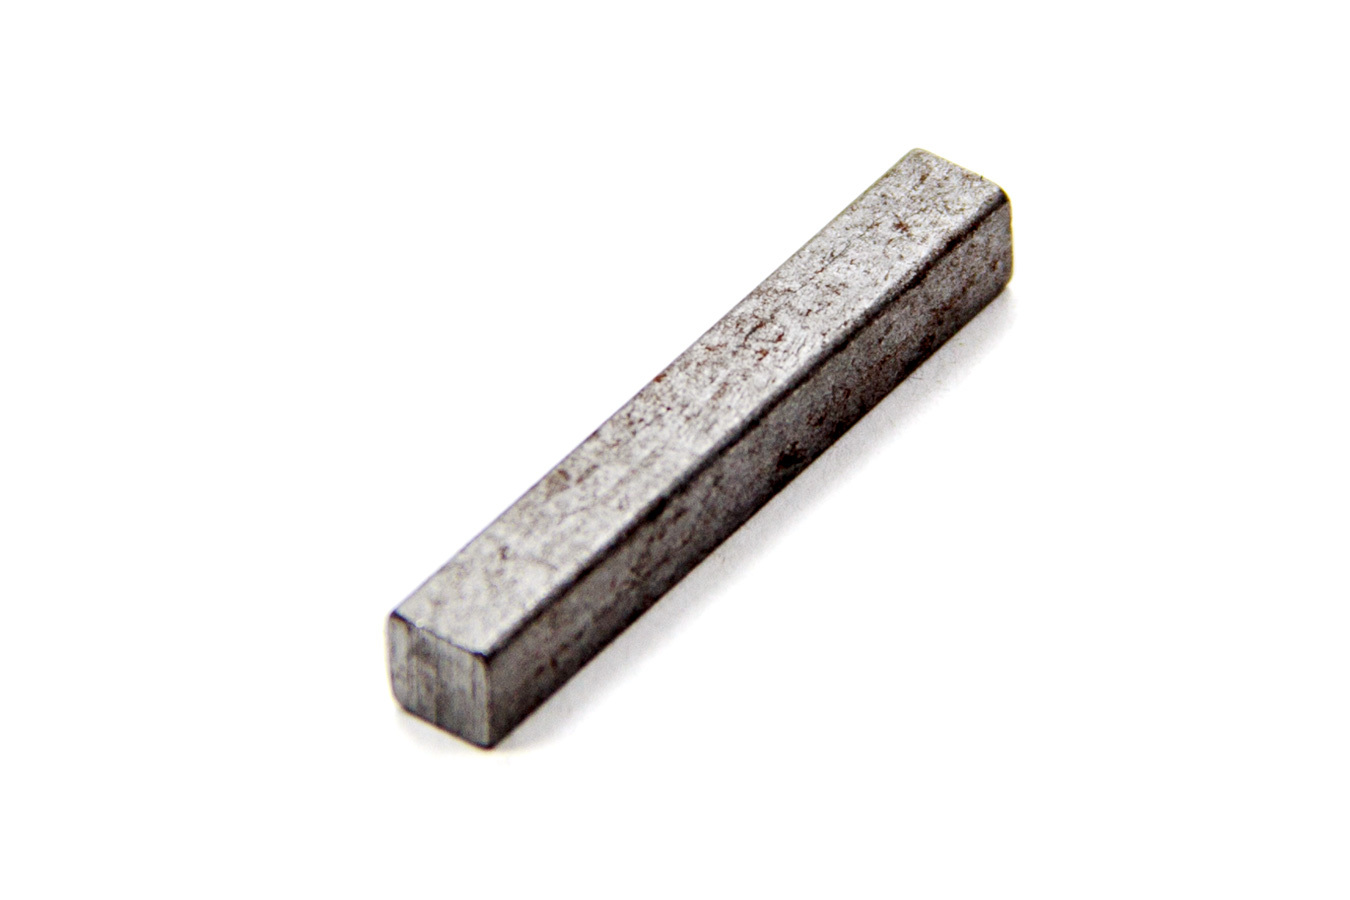 Stock Car Products 1071 Key Stock, 3/16 x 1-1/4 in Long, Steel, Natural, Each